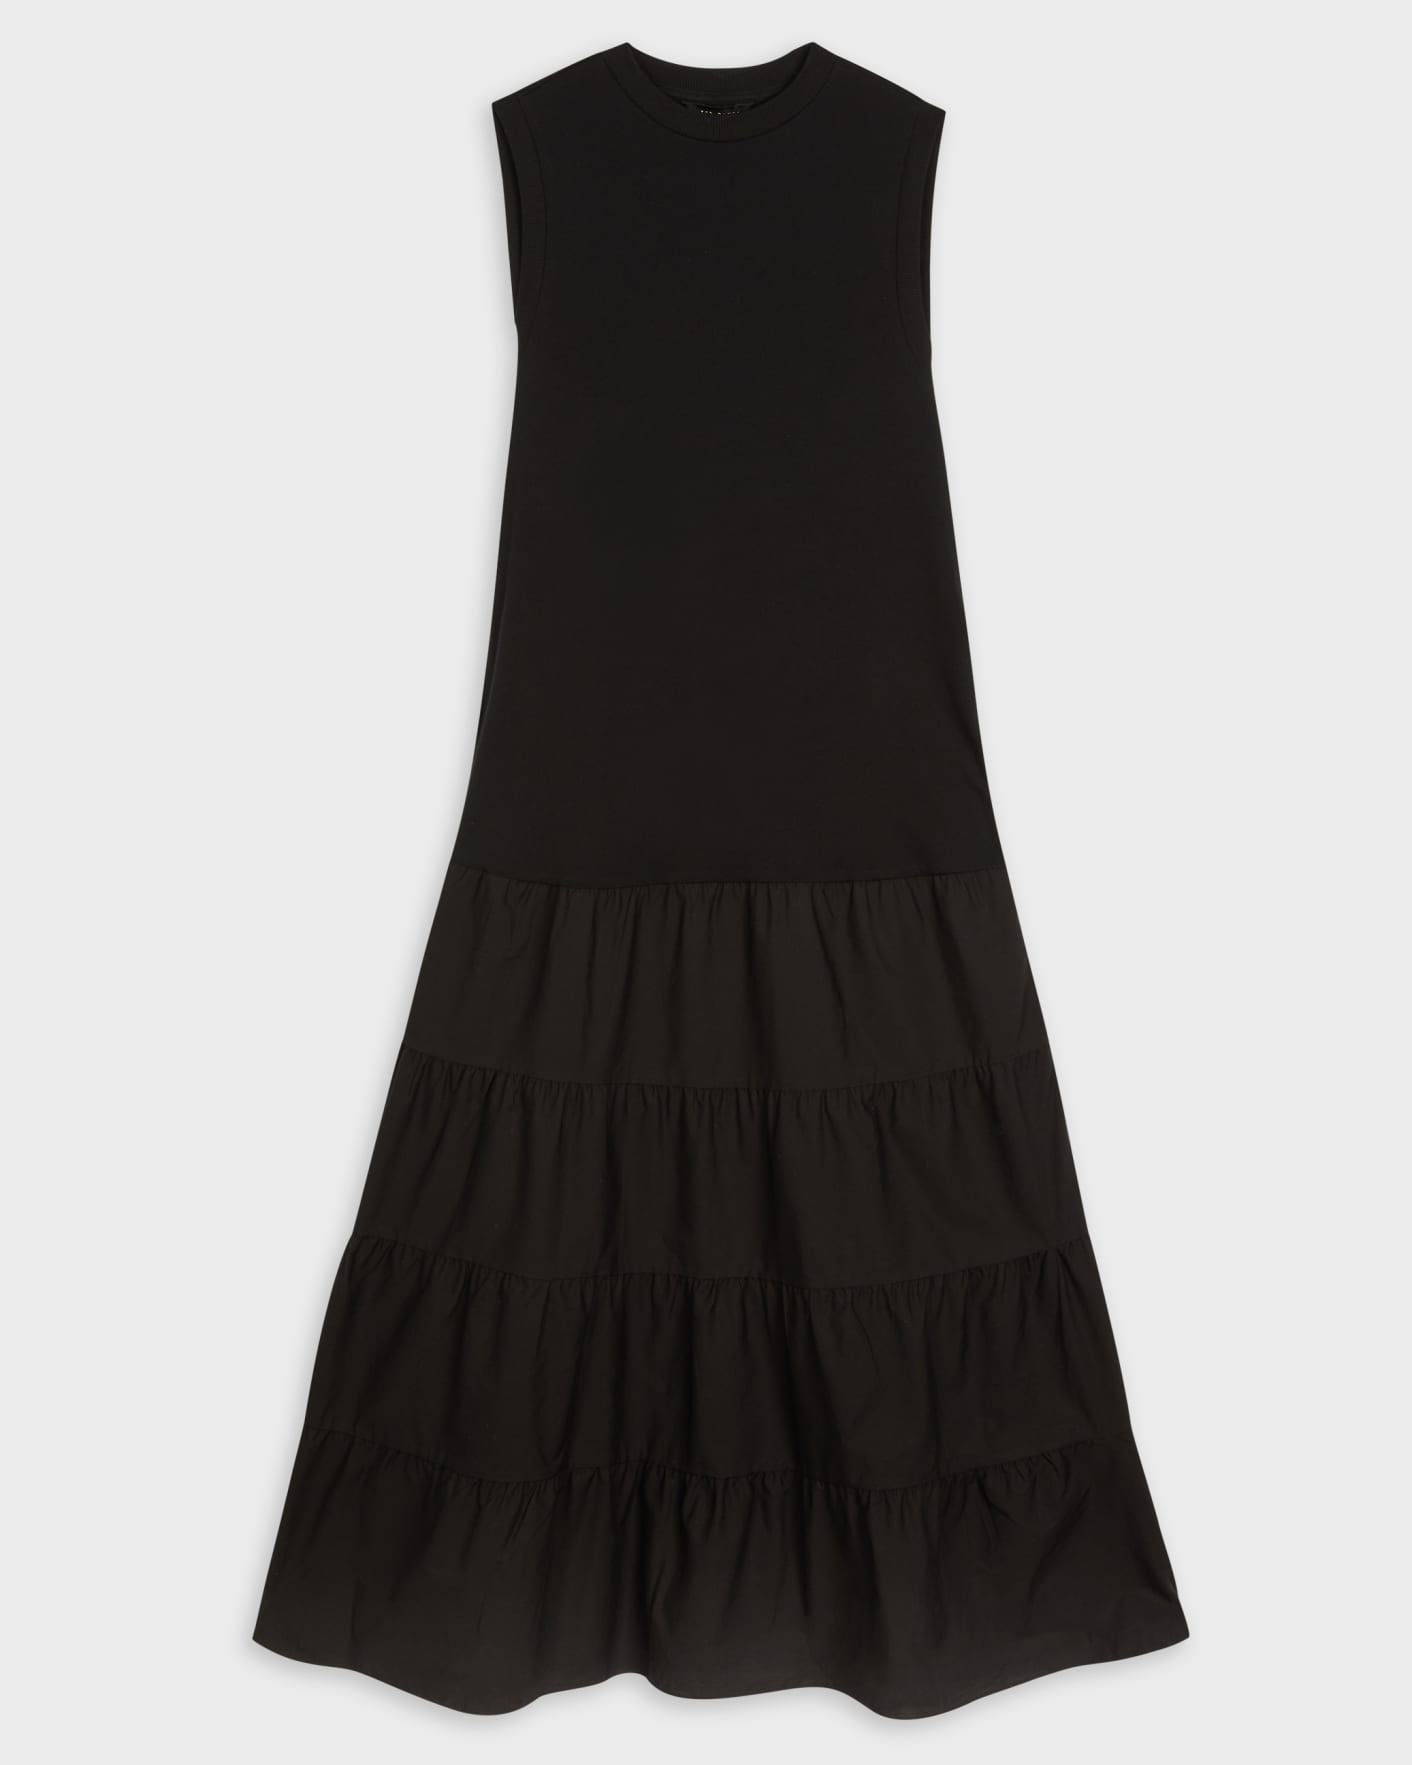 Black Tiered Jersey Dress Ted Baker